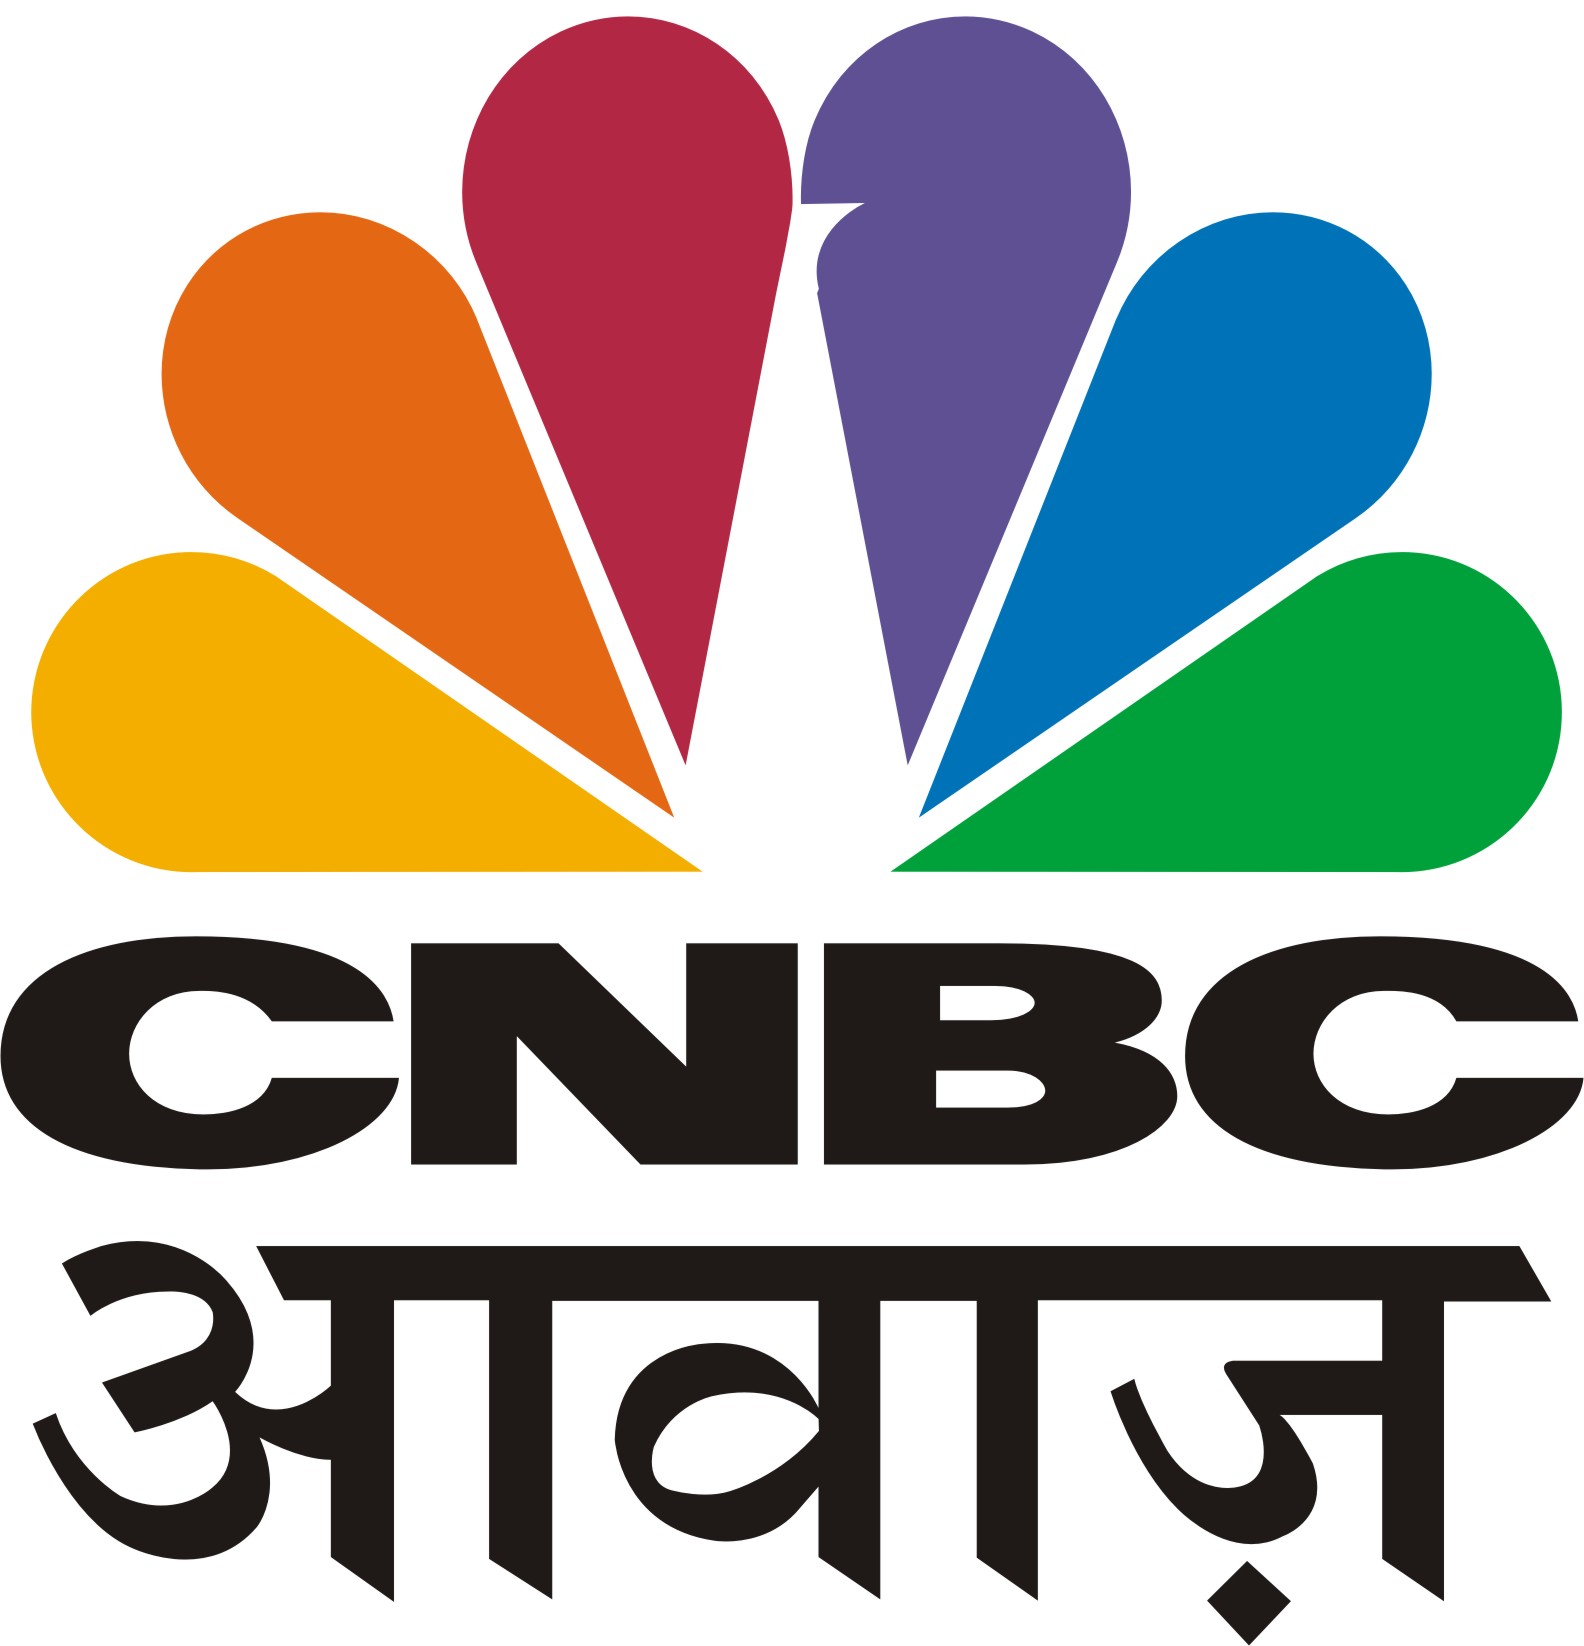 CNBC-TV18 is all set to host the 18th edition of the ‘India Business Leader Awards (IBLA ...